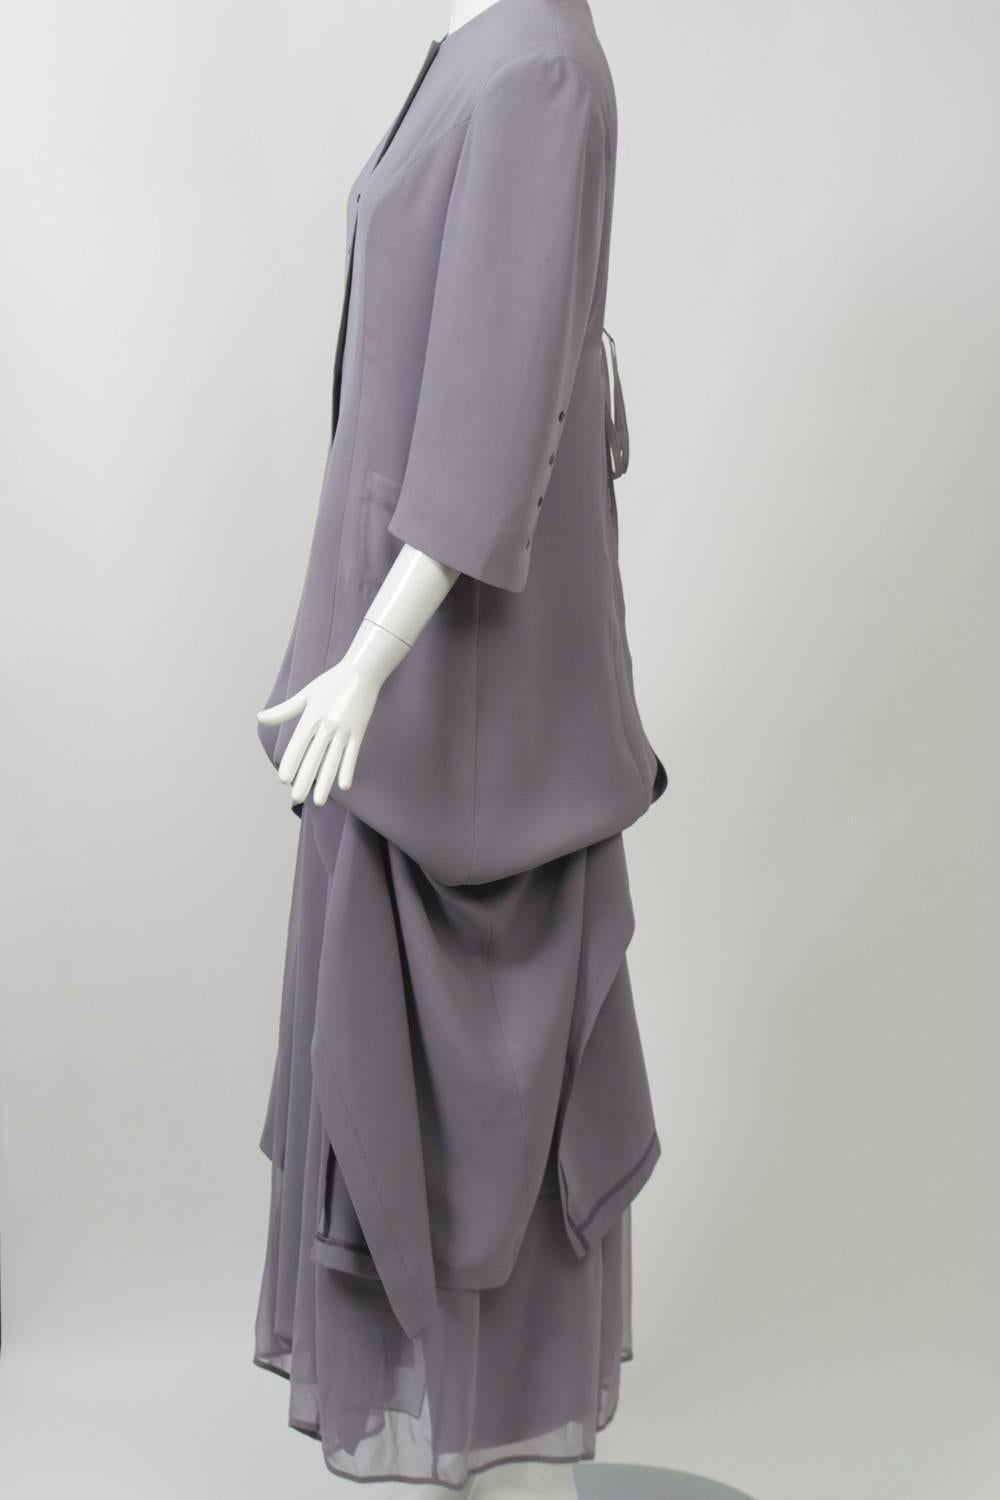 Morgane Le Fay long silk coat and dress in a subtle shade of lilac-tinged gray with intriguing detailing. The coat features interior ties, two on each side, which draw up the long skirt like a shade, revealing a layer of chiffon underneath, which is